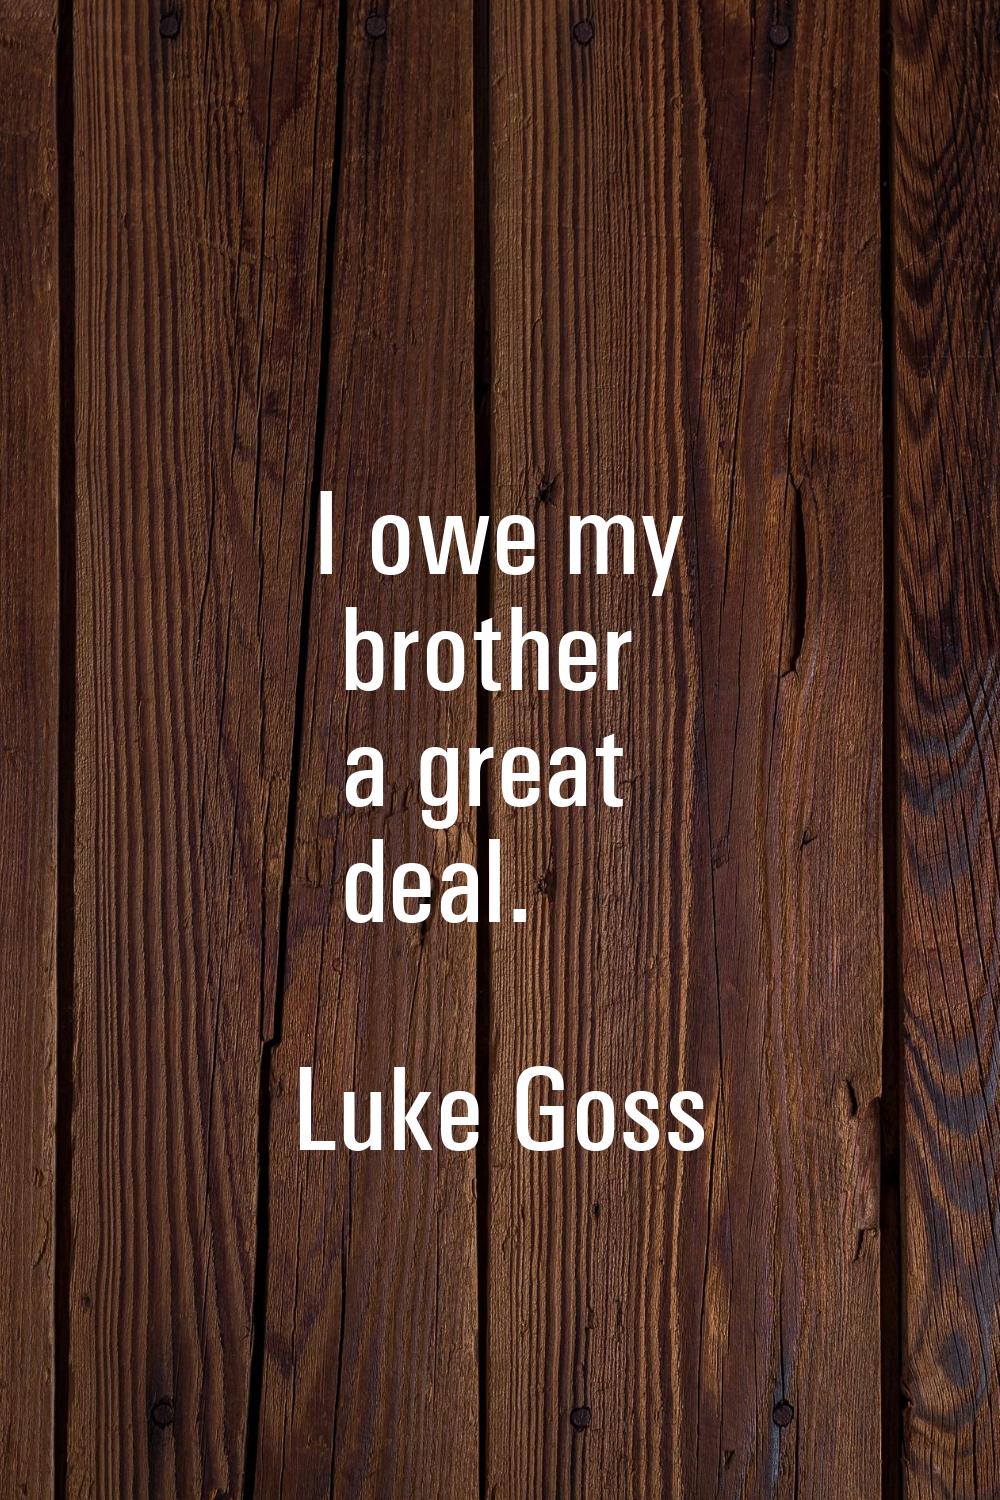 I owe my brother a great deal.